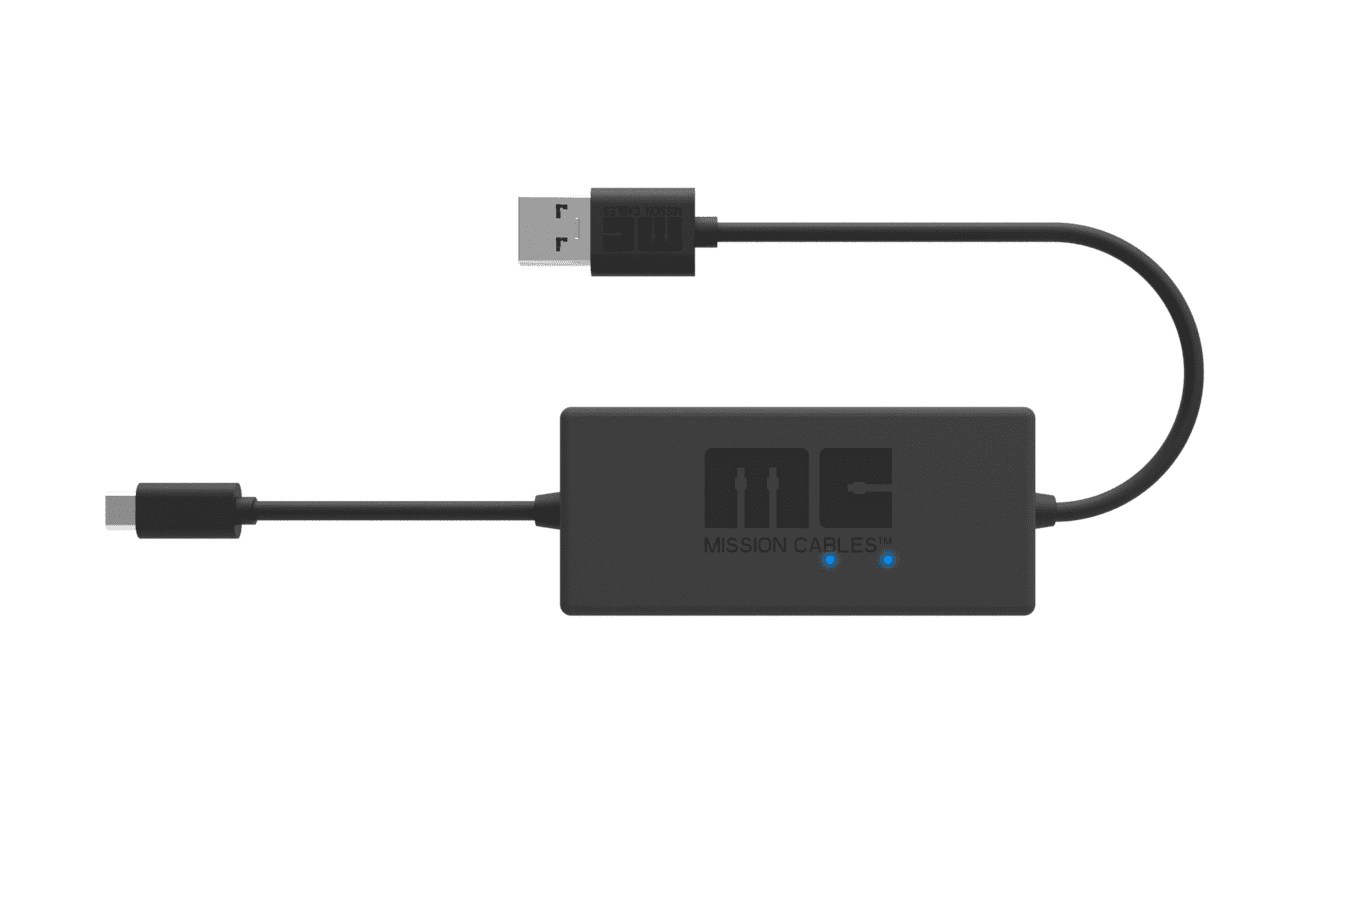 Mission USB Power Cable for Chromecast and Chromecast Ultra (CHROMECAST NOT  Included)